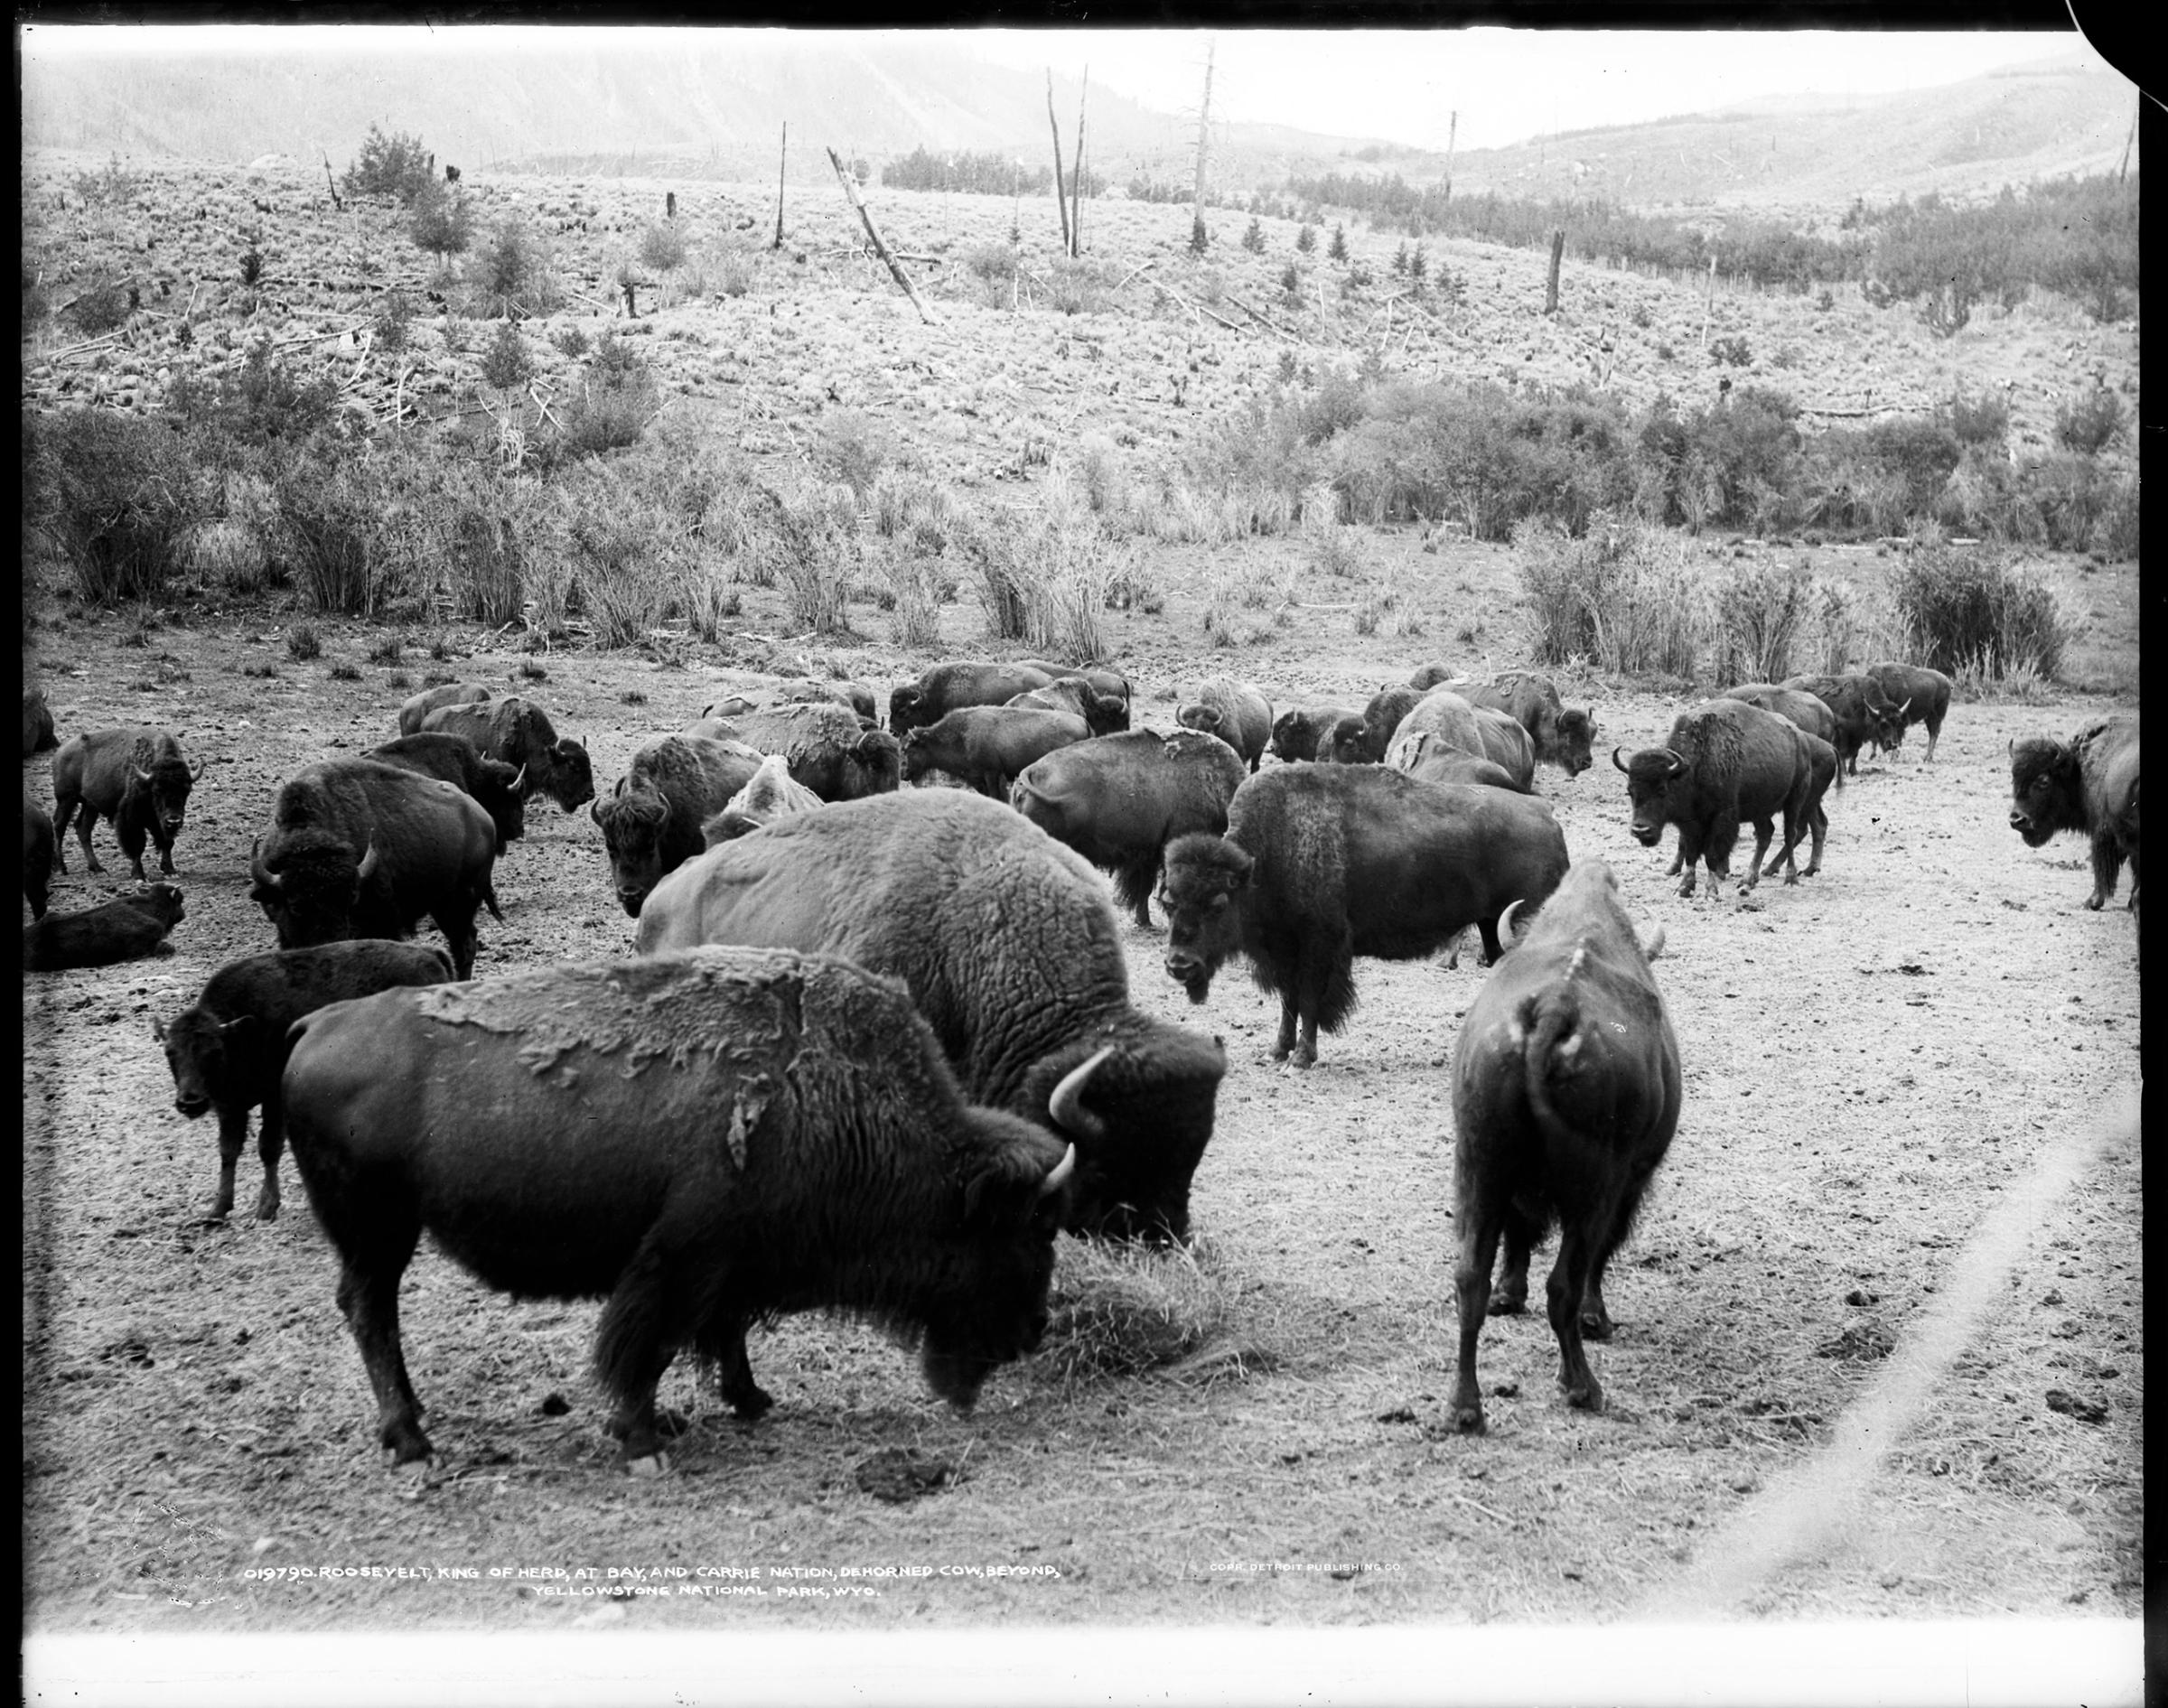 Bison in the Yellowstone National Park, Wyoming. Circa 1907.